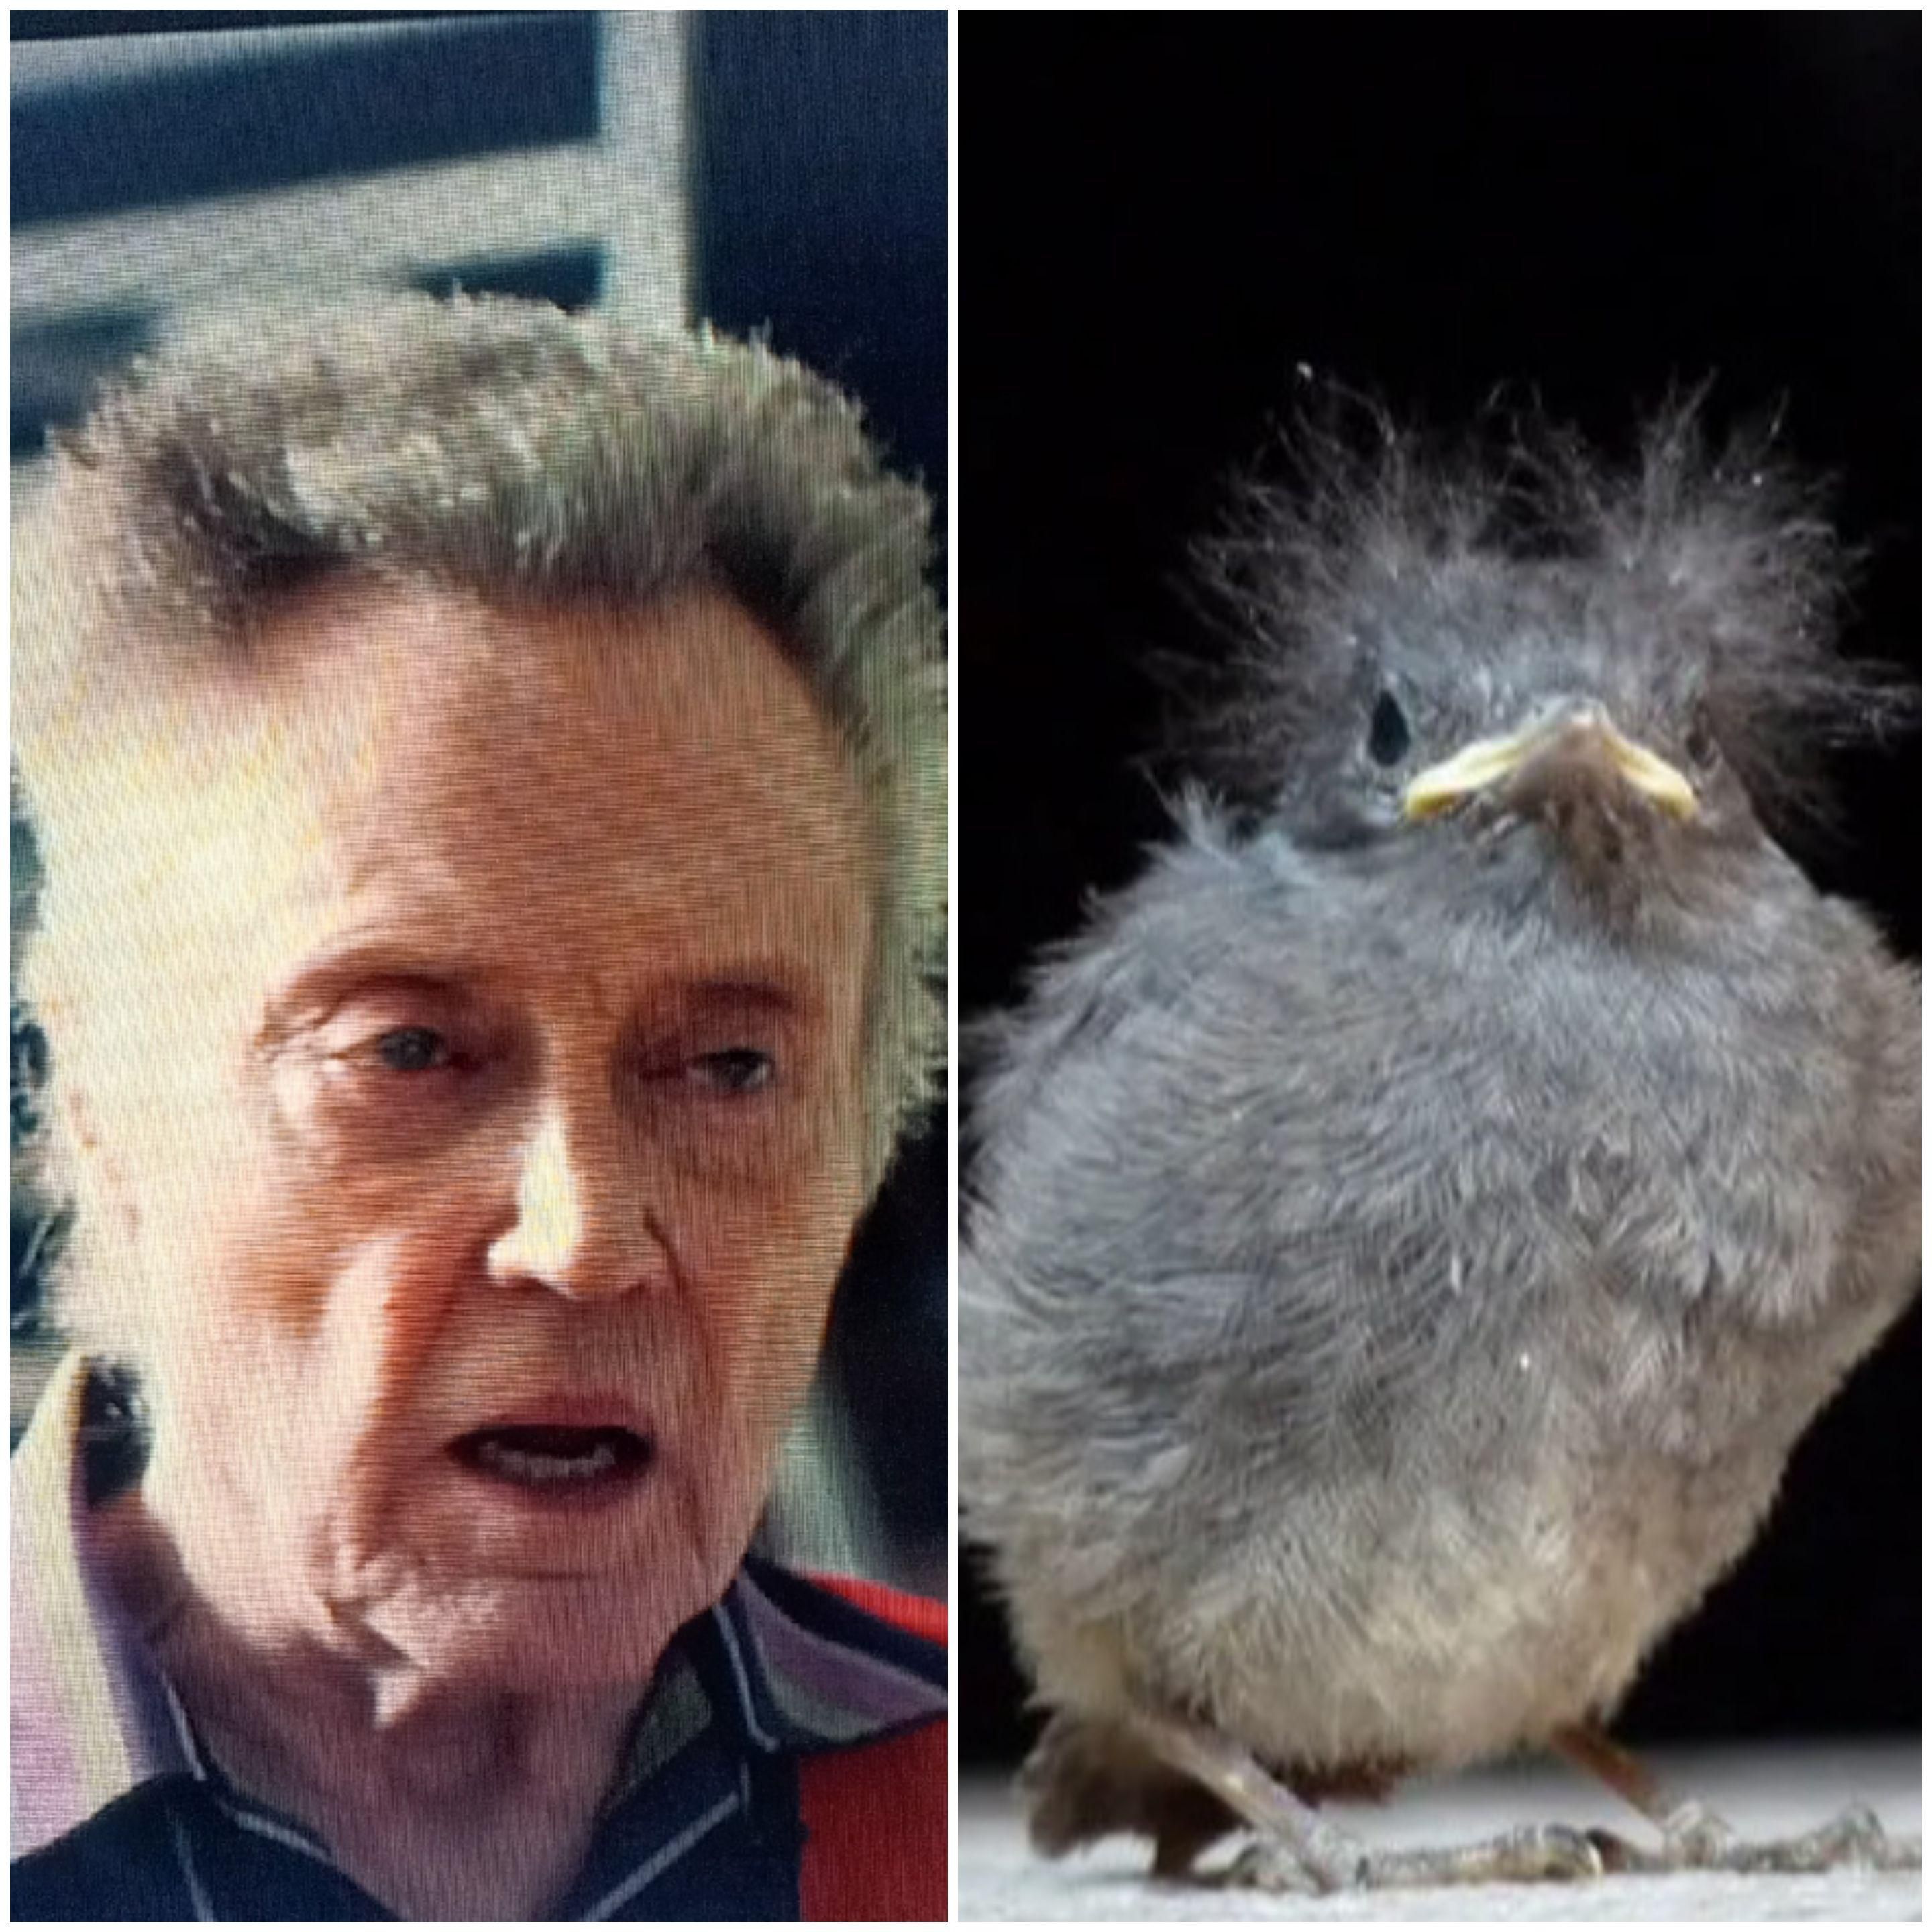 My wife said Christopher Walken is looking like a bluejay fledgling....she was spot on!